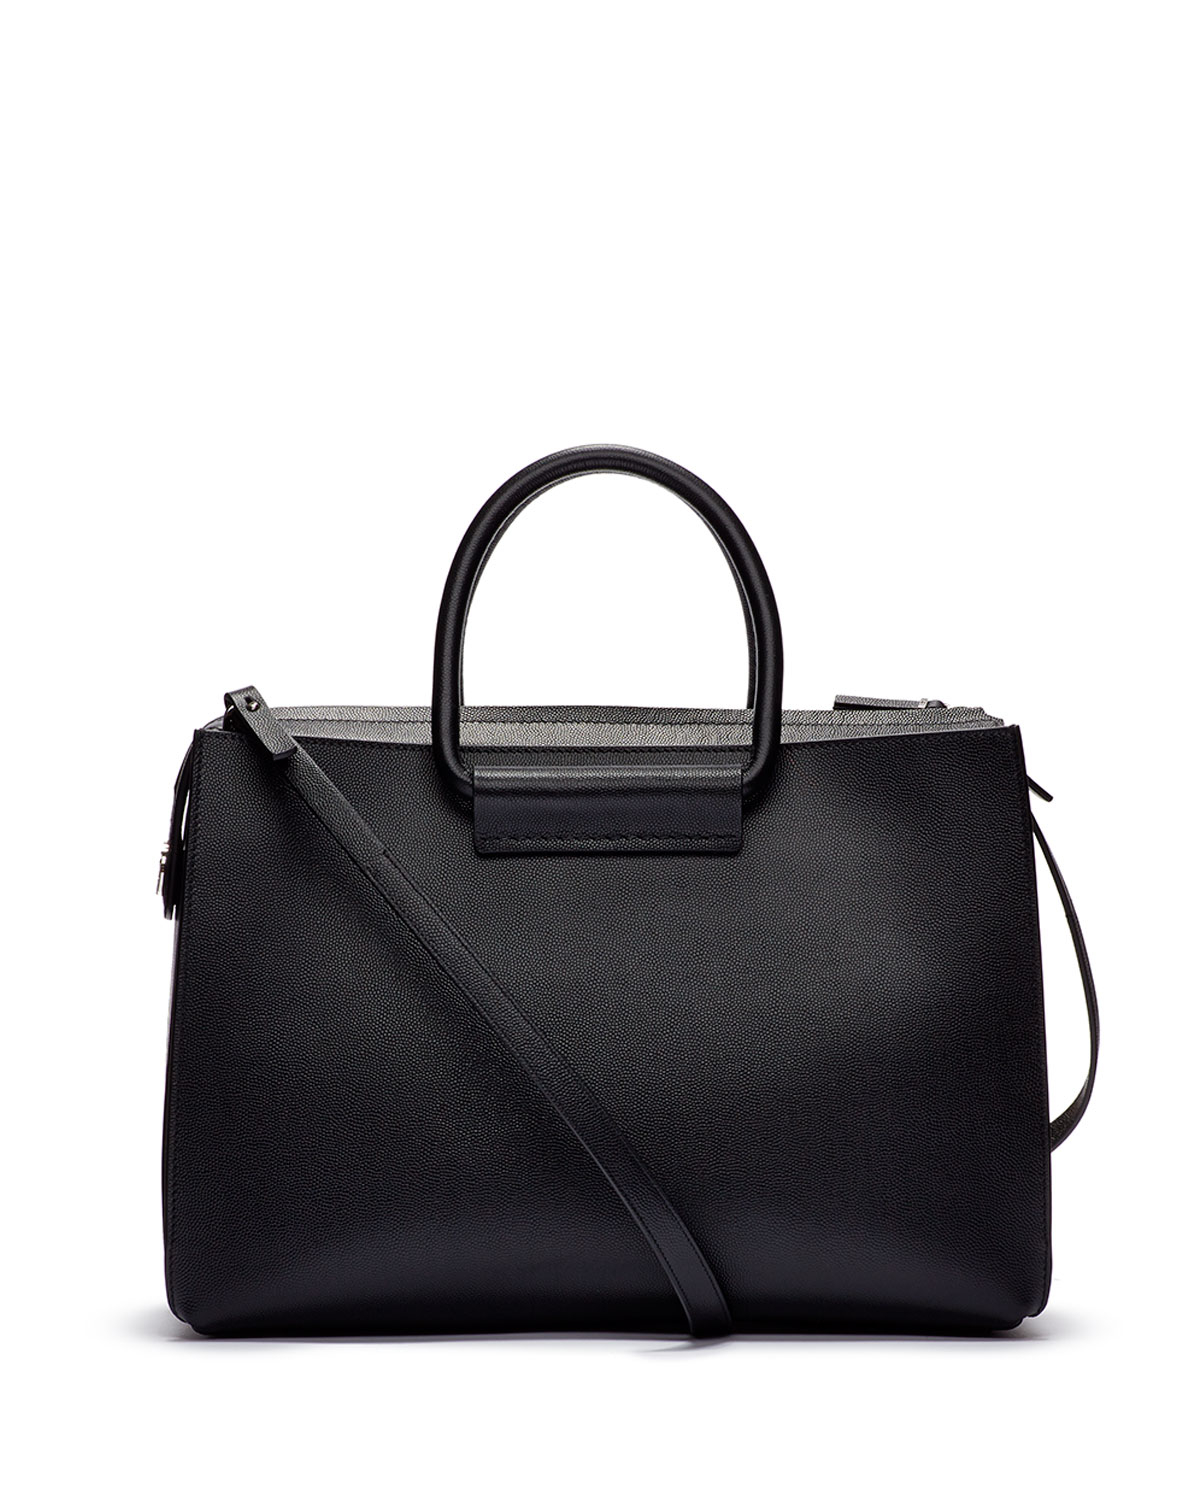 Lyst - The row Satchel 12 Leather Tote Bag in Black